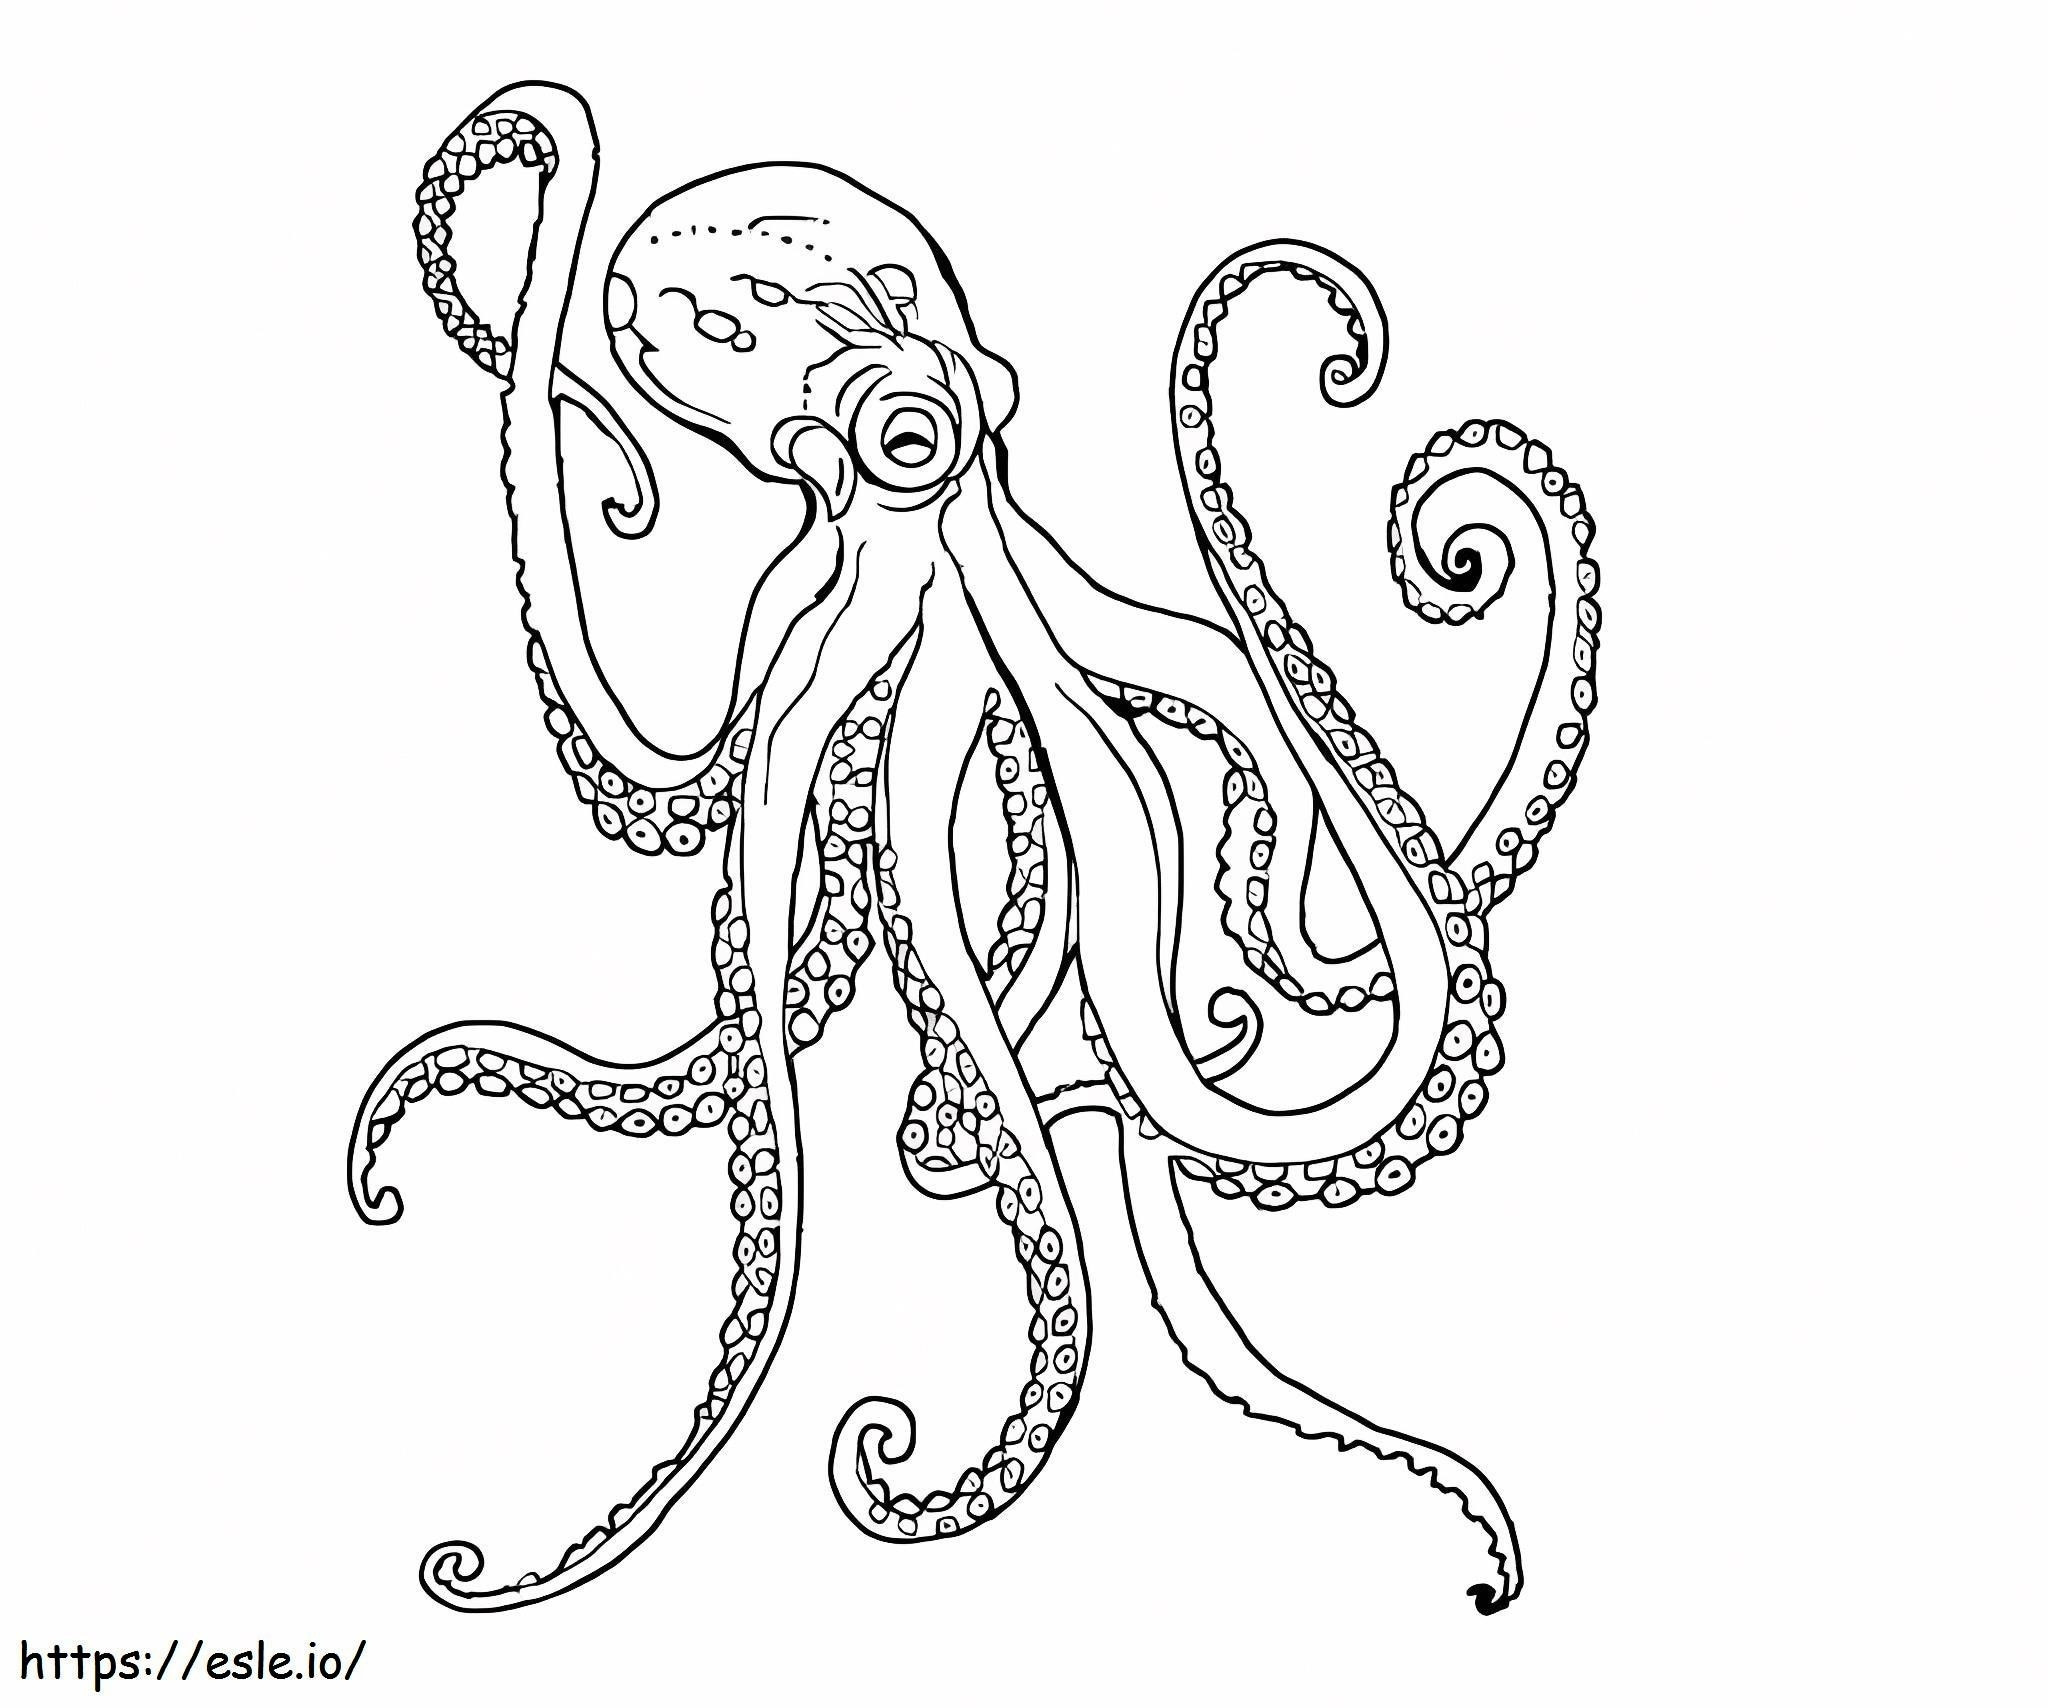 Amazing Octopus coloring page